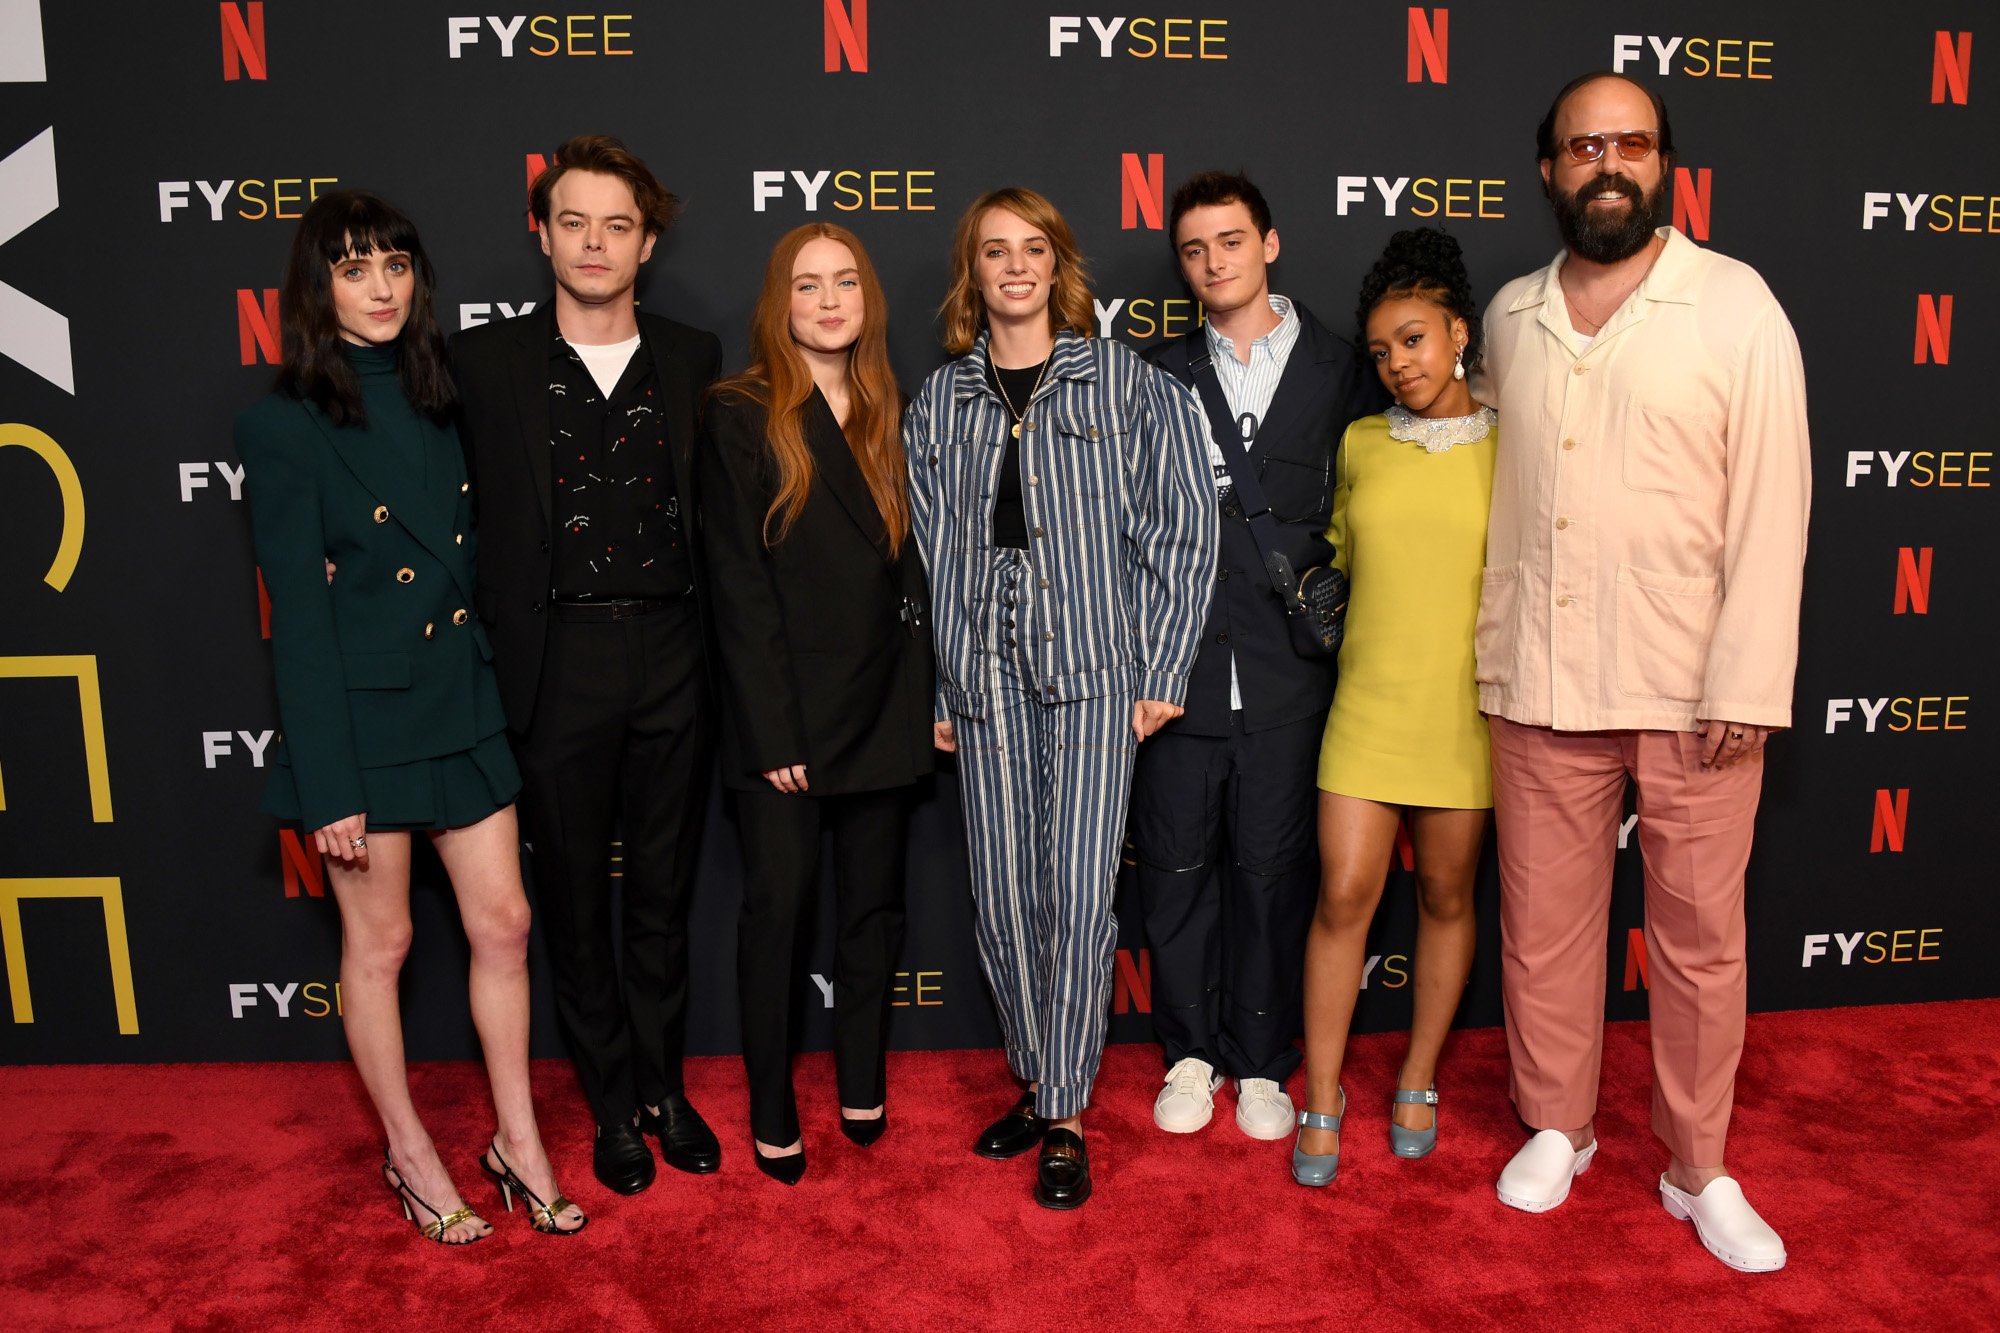 'Stranger Things' cast members Natalia Dyer, Charlie Heaton, Sadie Sink, Maya Hawke, Noah Schnapp, Priah Ferguson and Brett Gelman. They're standing together on the red carpet for a Netflix event promoting the show.